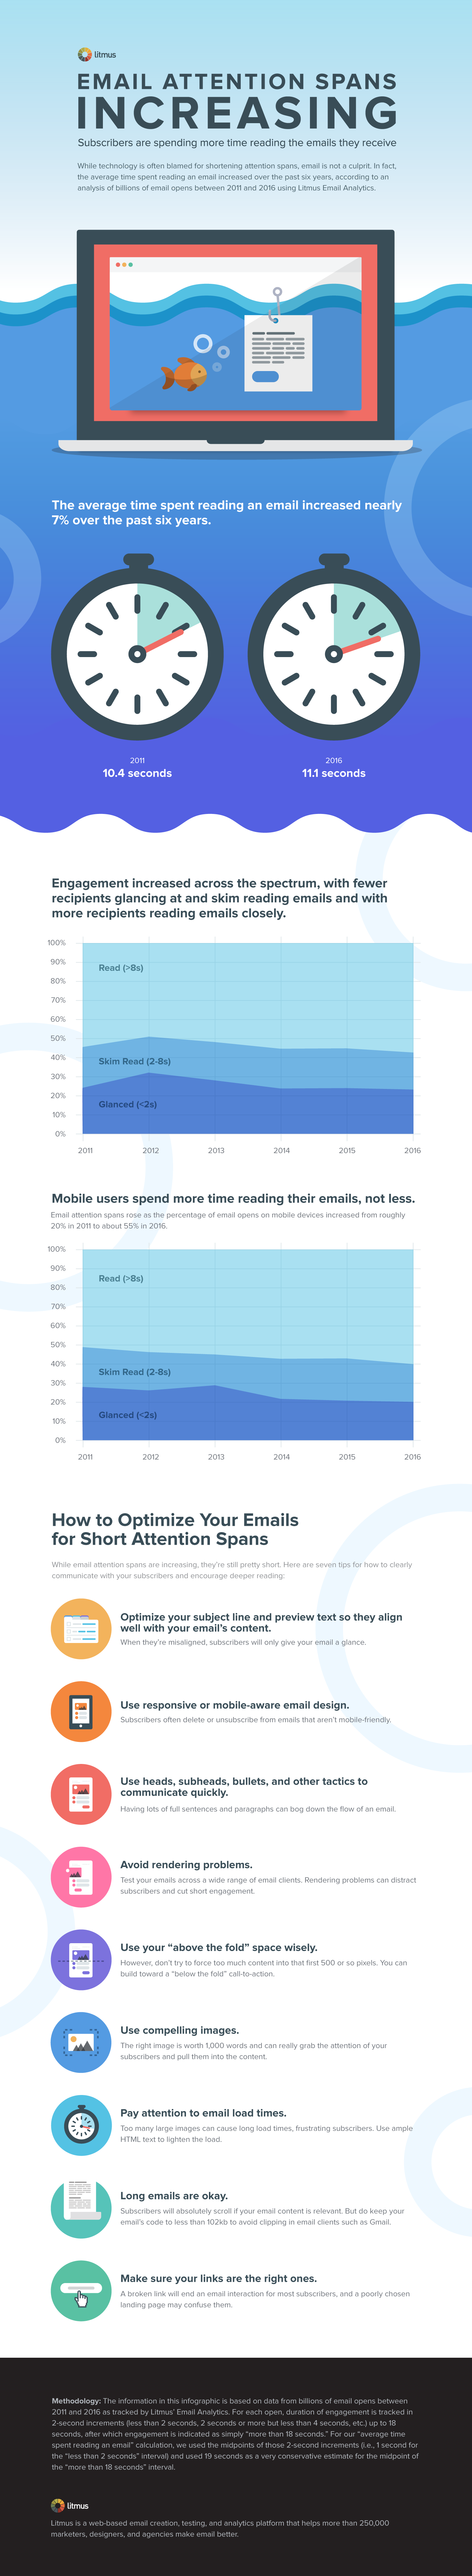 How to Cure a Short Attention Span With Email - #infographic